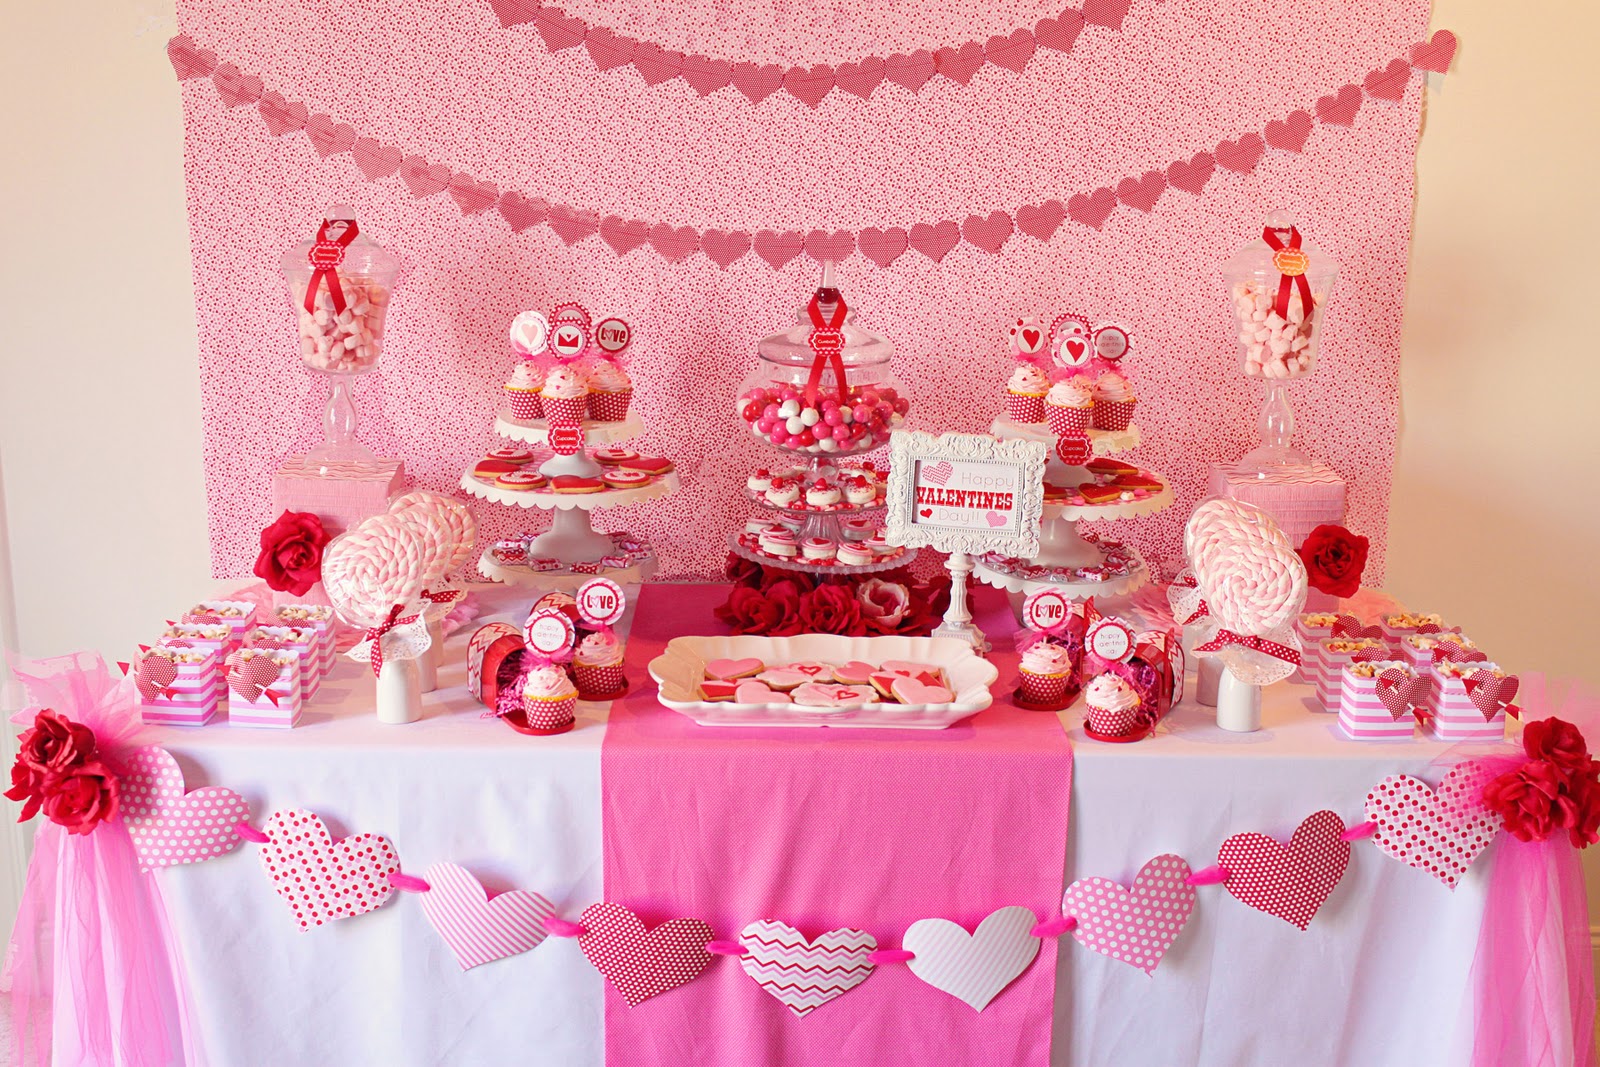 Amanda's Parties To Go: Valentines Party Table Ideas